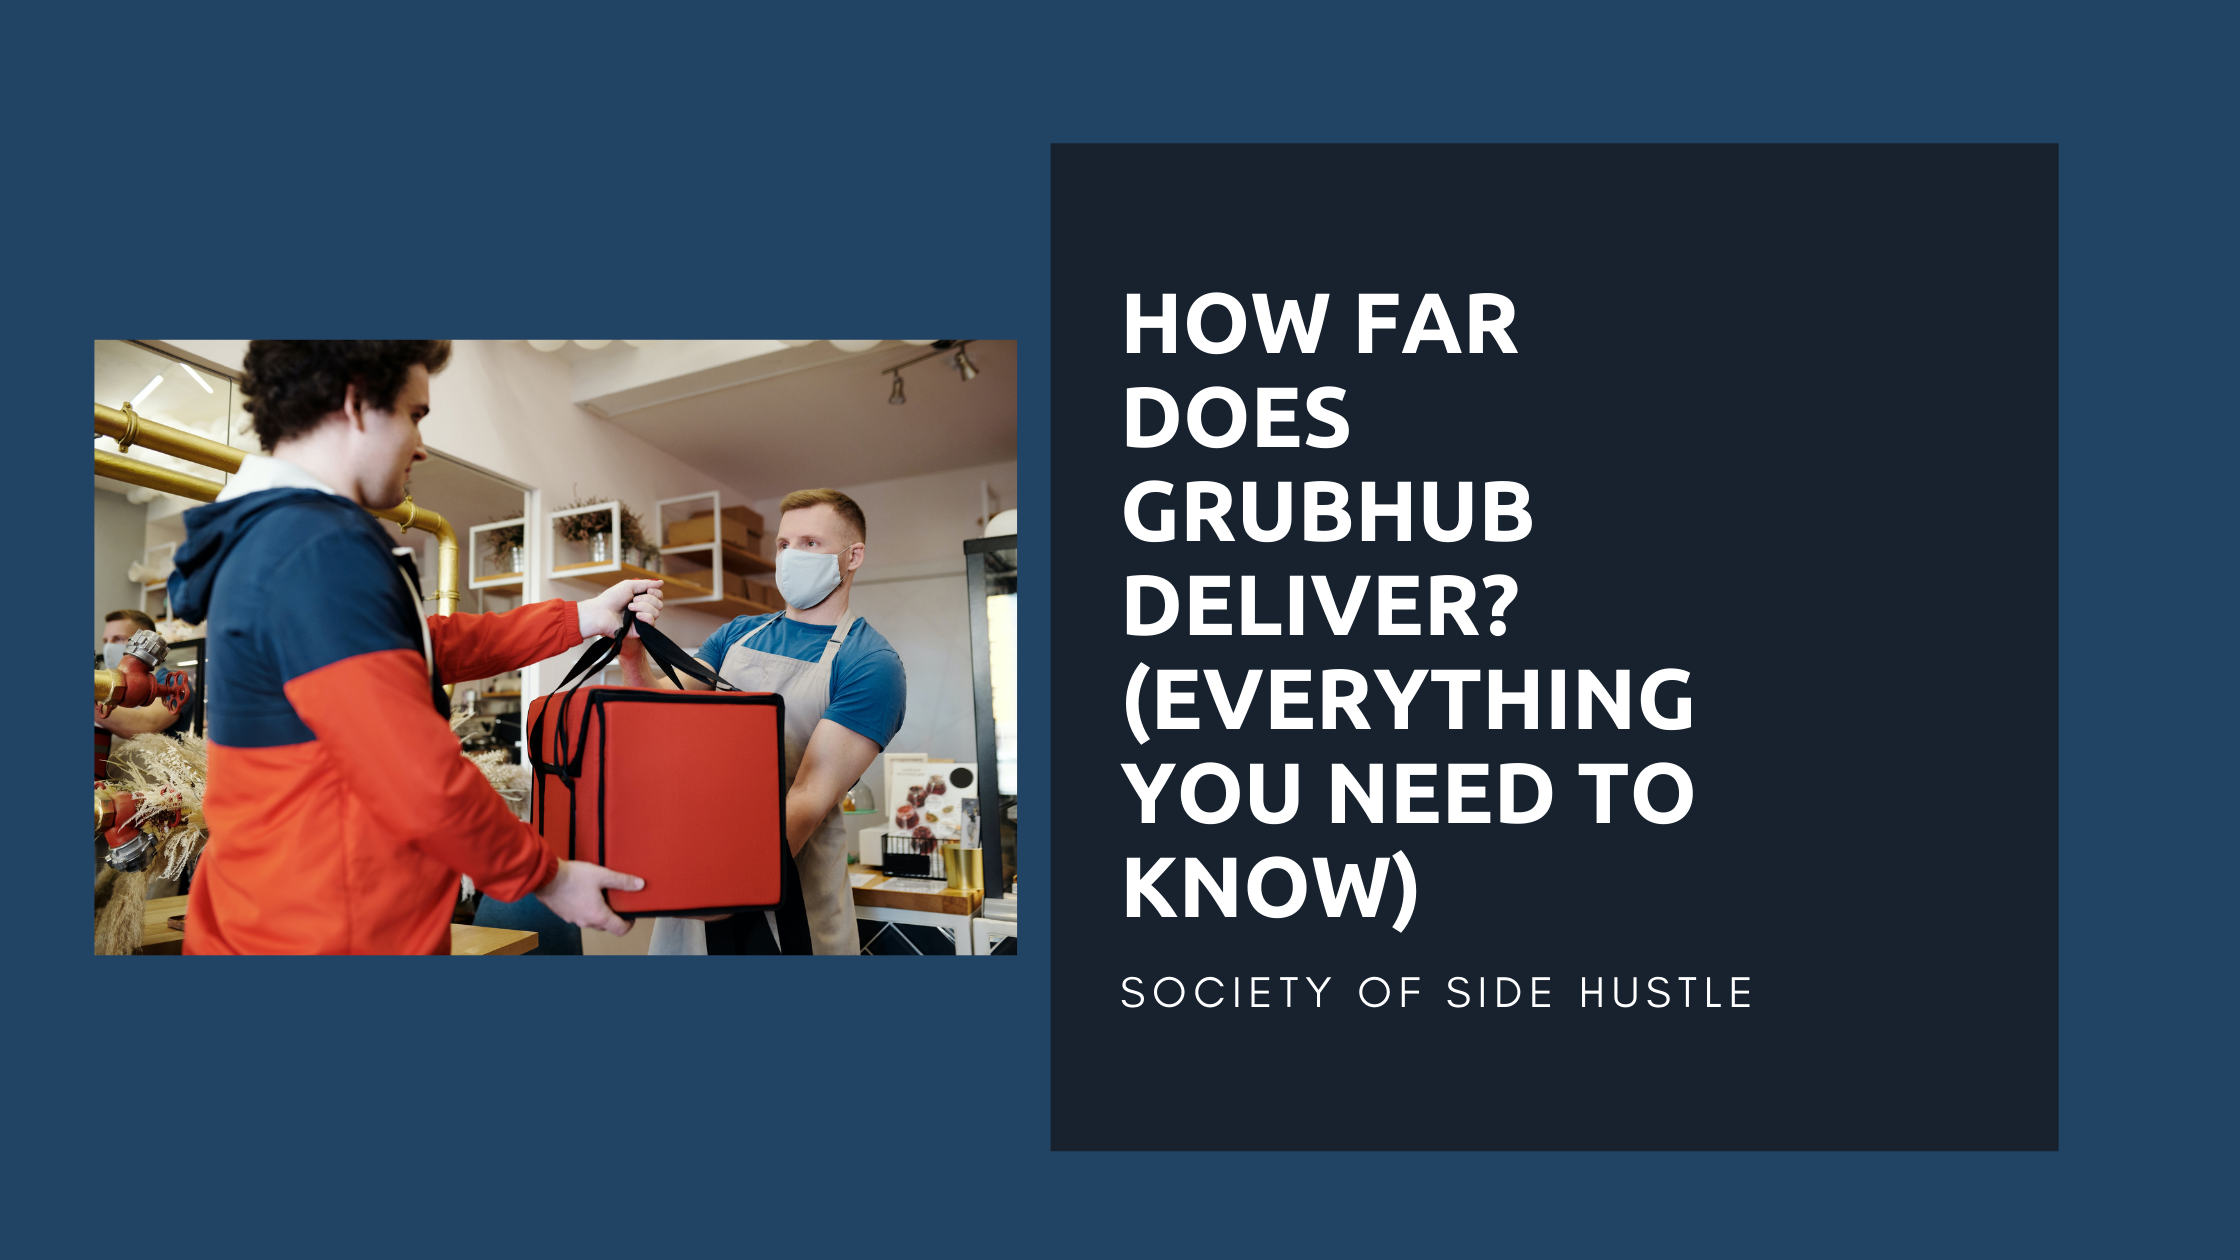 How Far Does Grubhub Deliver? (Everything You Need To Know)